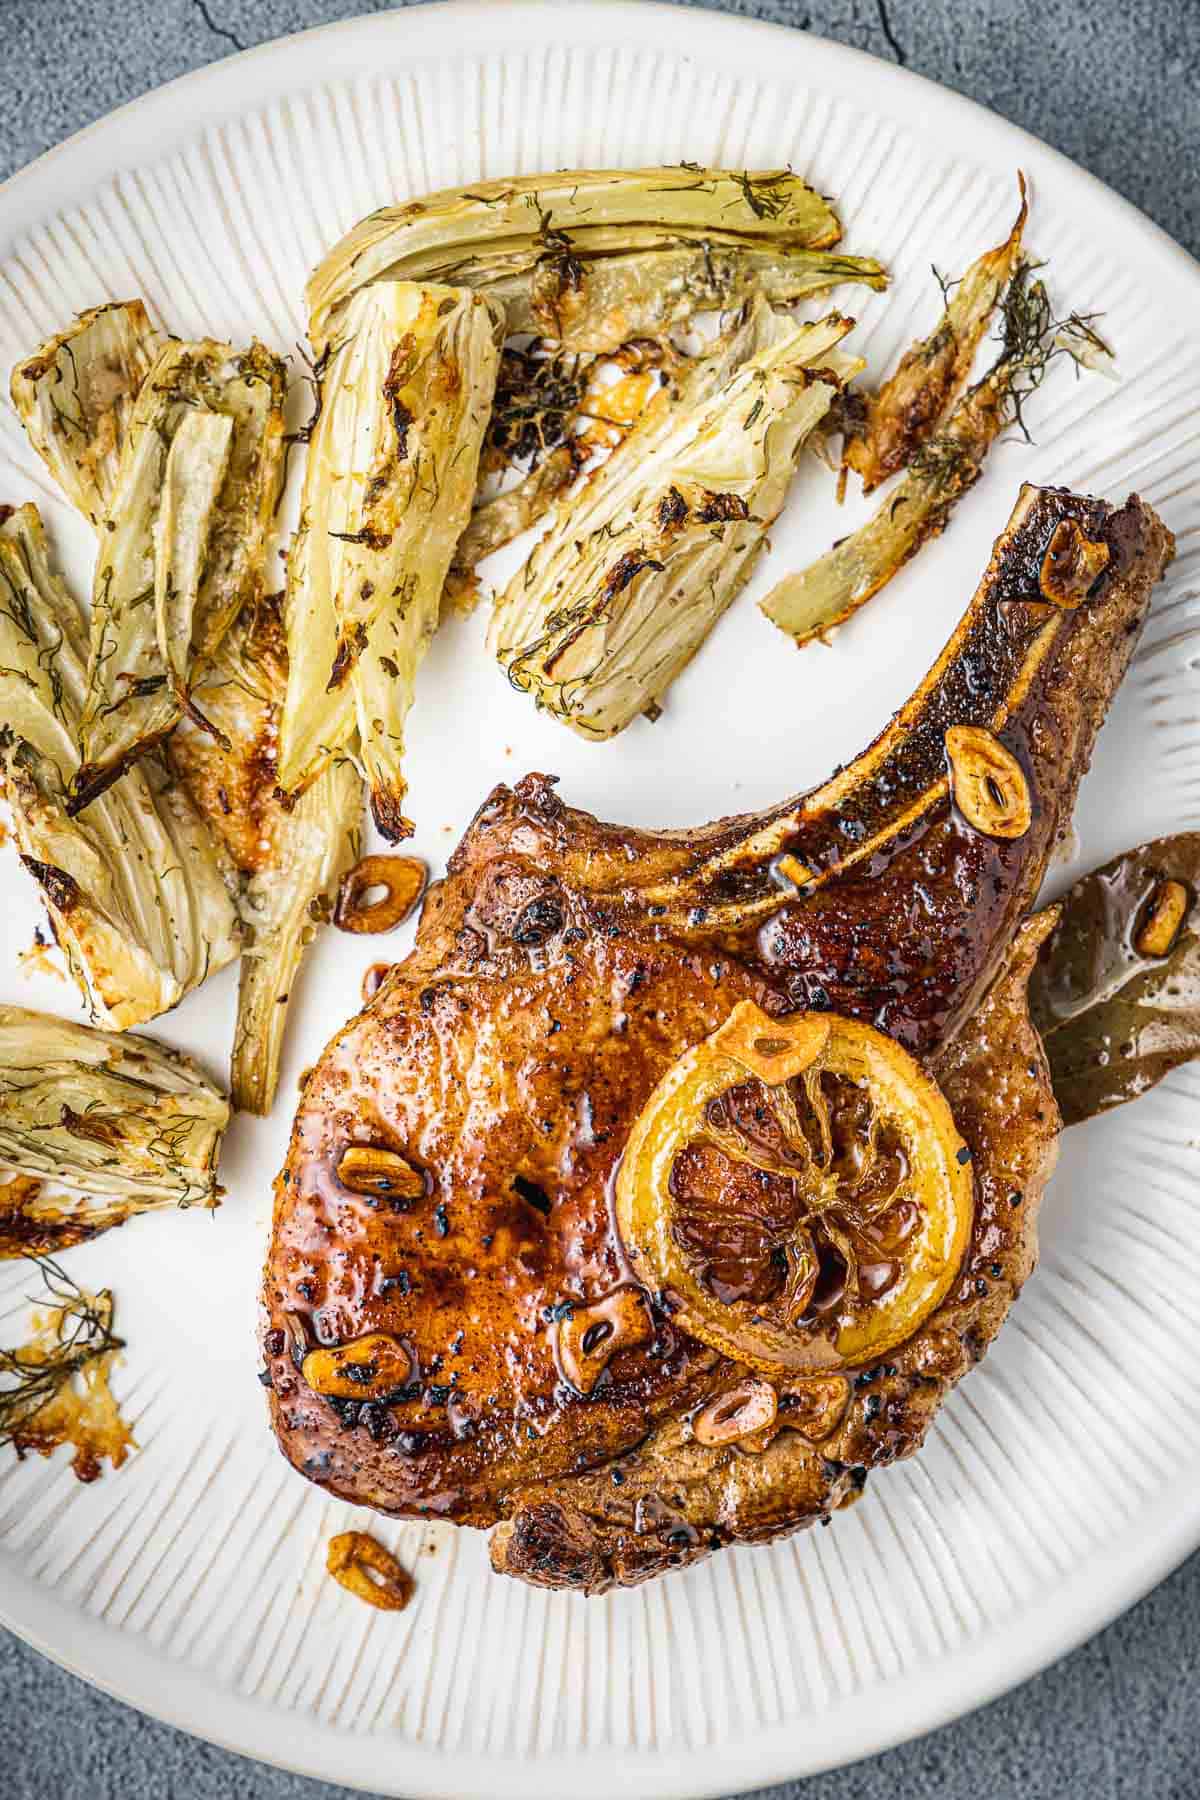 a pan seared pork chop on a plate with roasted fennel.